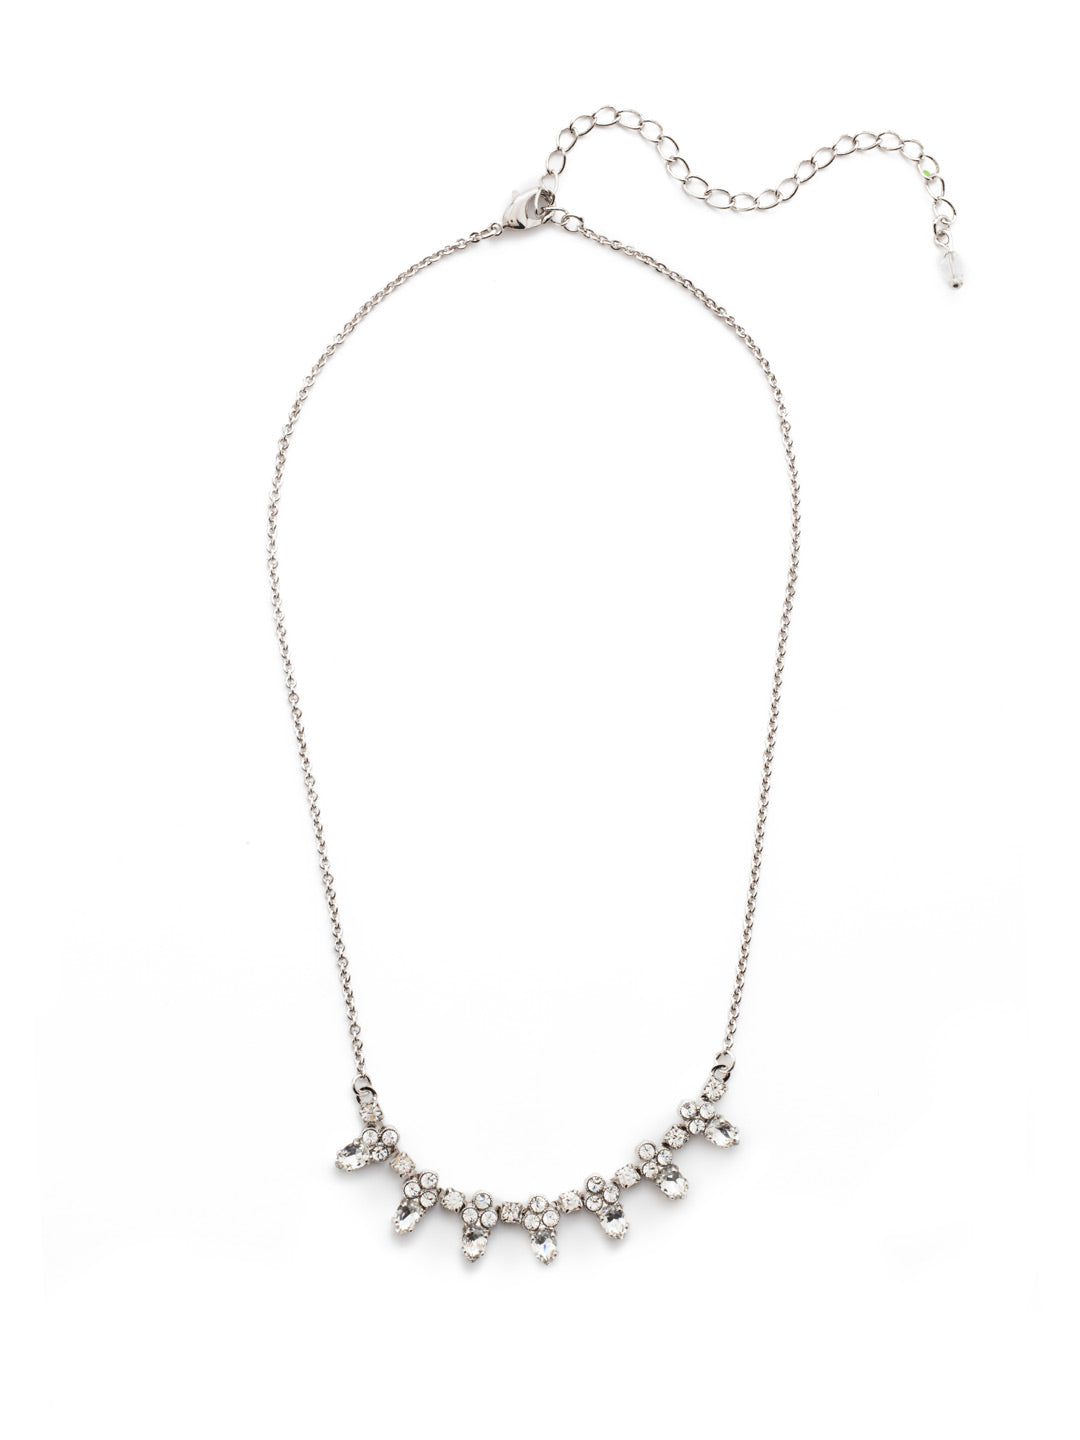 Twinkling Thistle Tennis Necklace - NDN46RHCRY